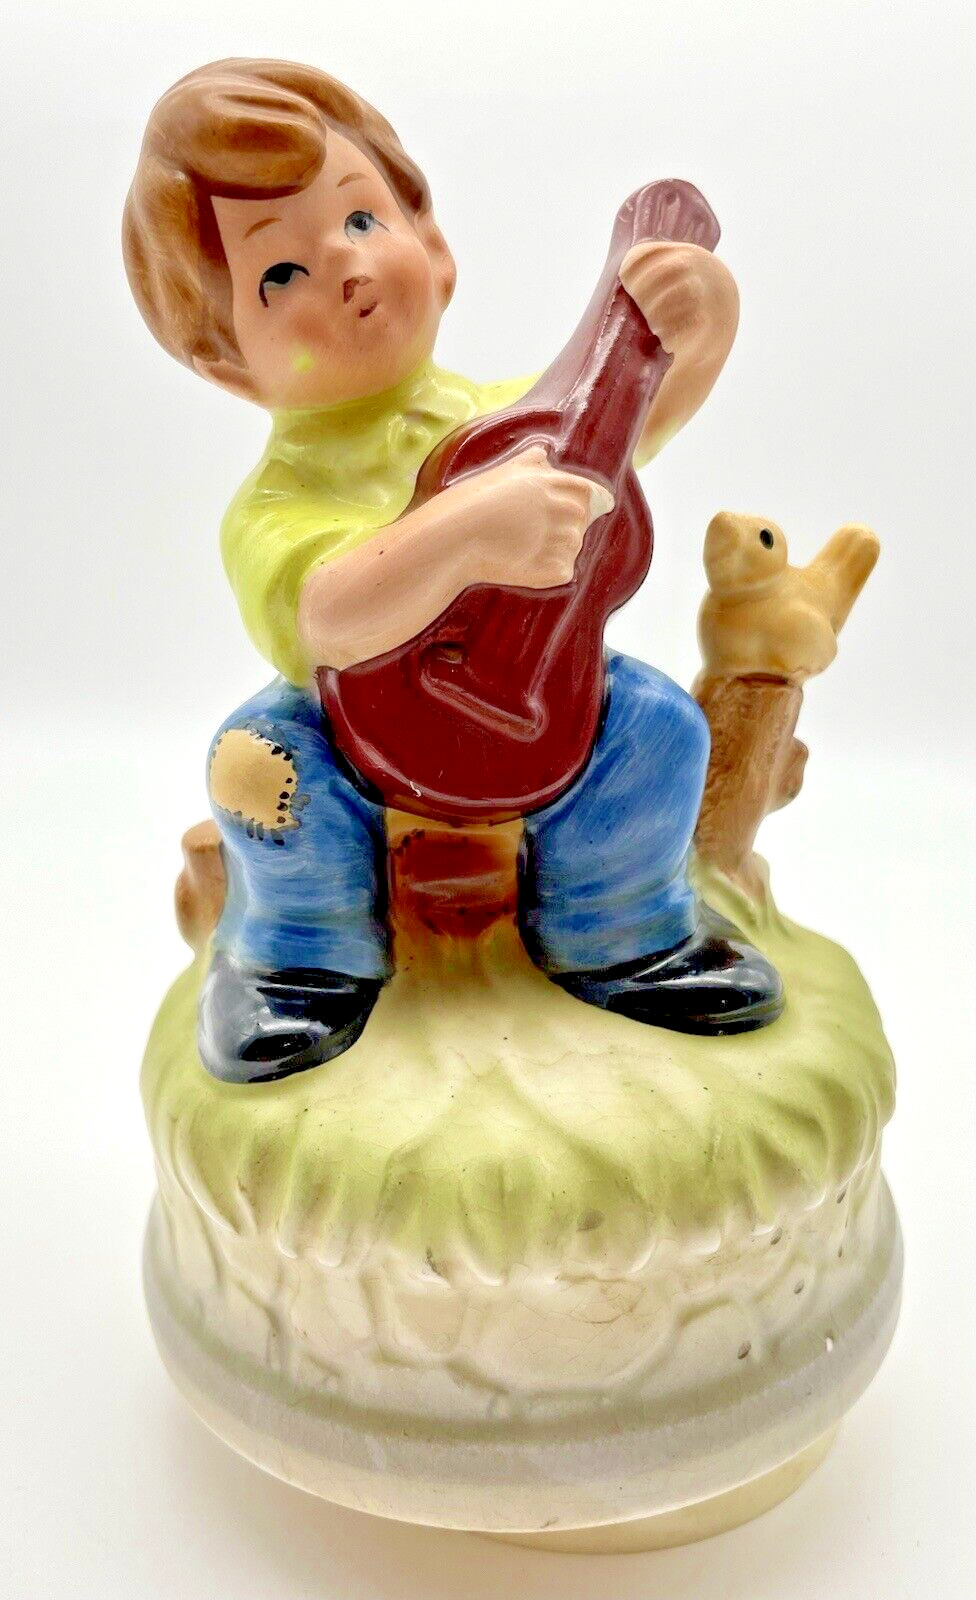 Vintage Music Box Japan Boy with Guitar TALES FROM THE VIENNA WOODS VIDEO WORKS